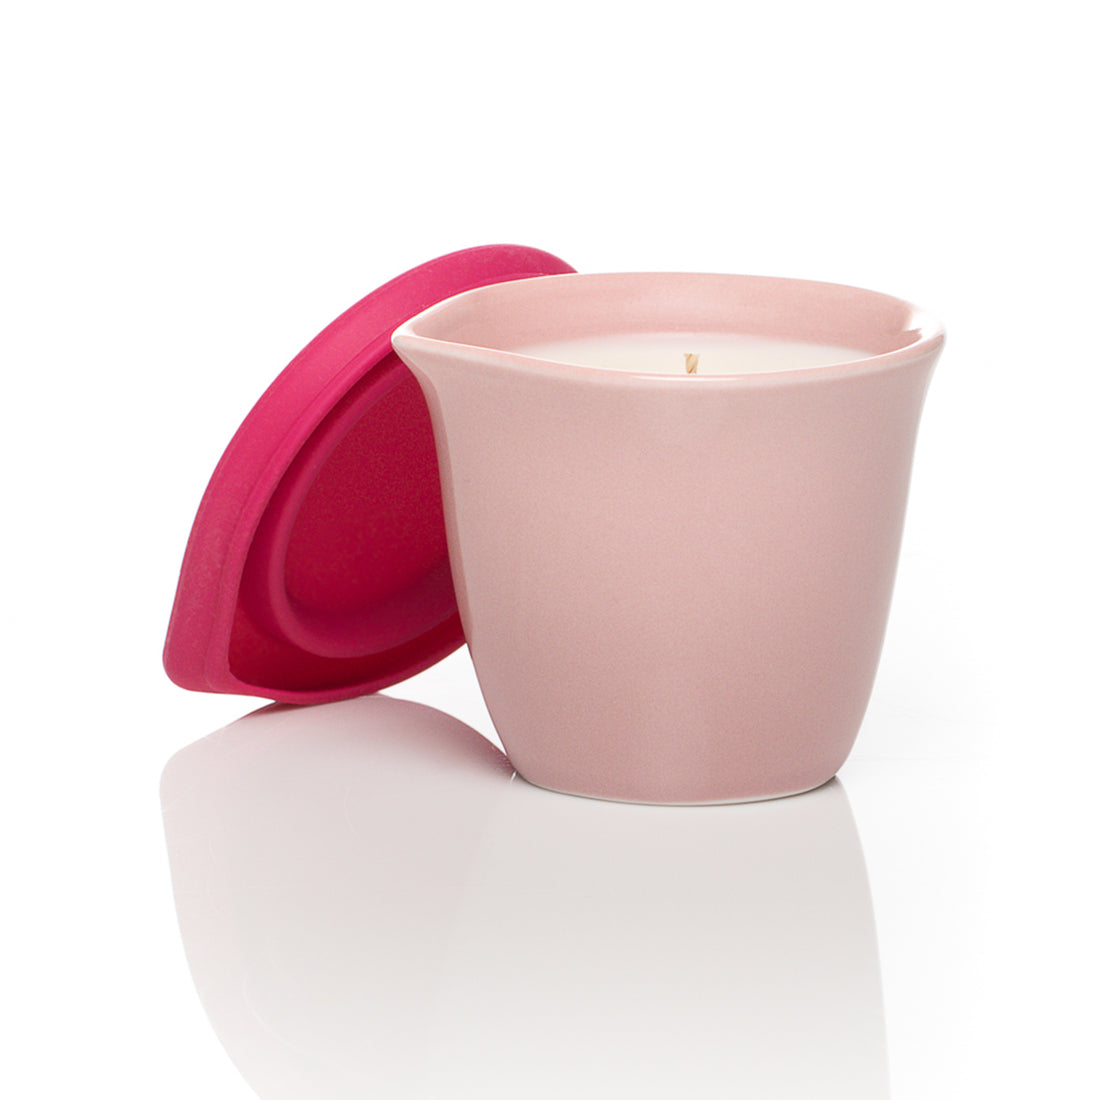 Self + Jimmyjane bergamot rose scented massage oil candle with burgundy base Front facing view